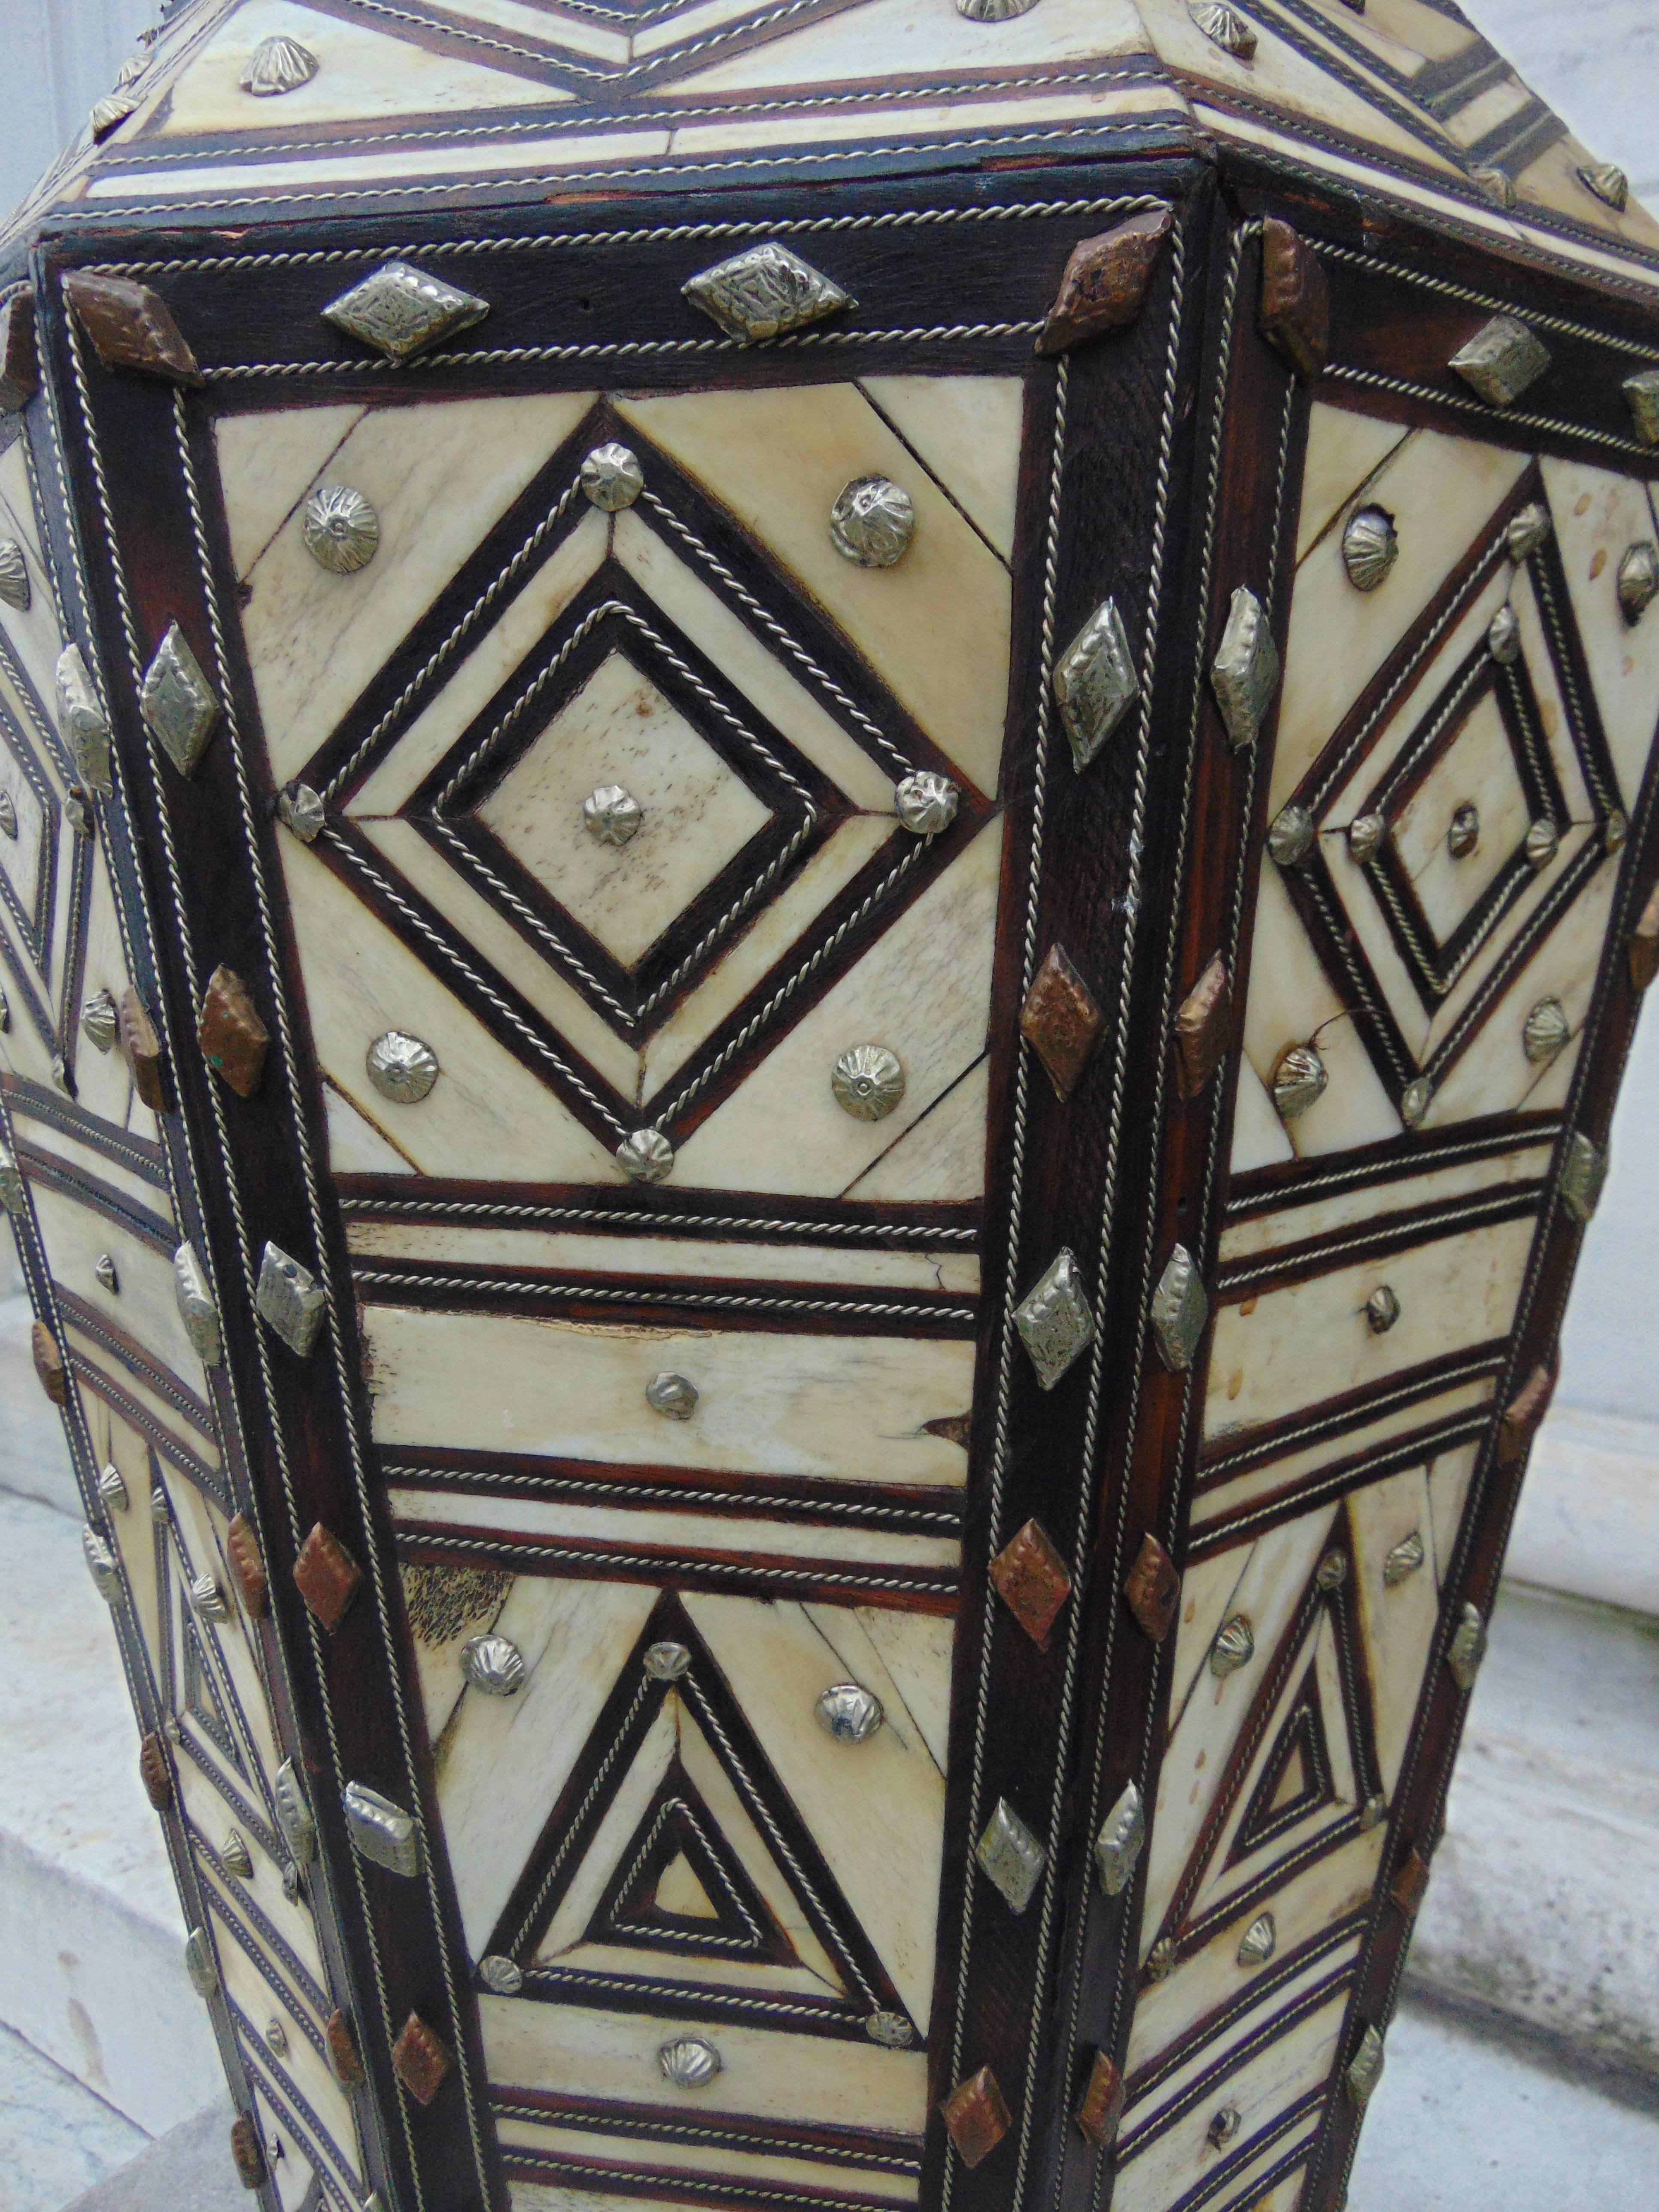 19th century bone, silver, and wood marquetry large vase.